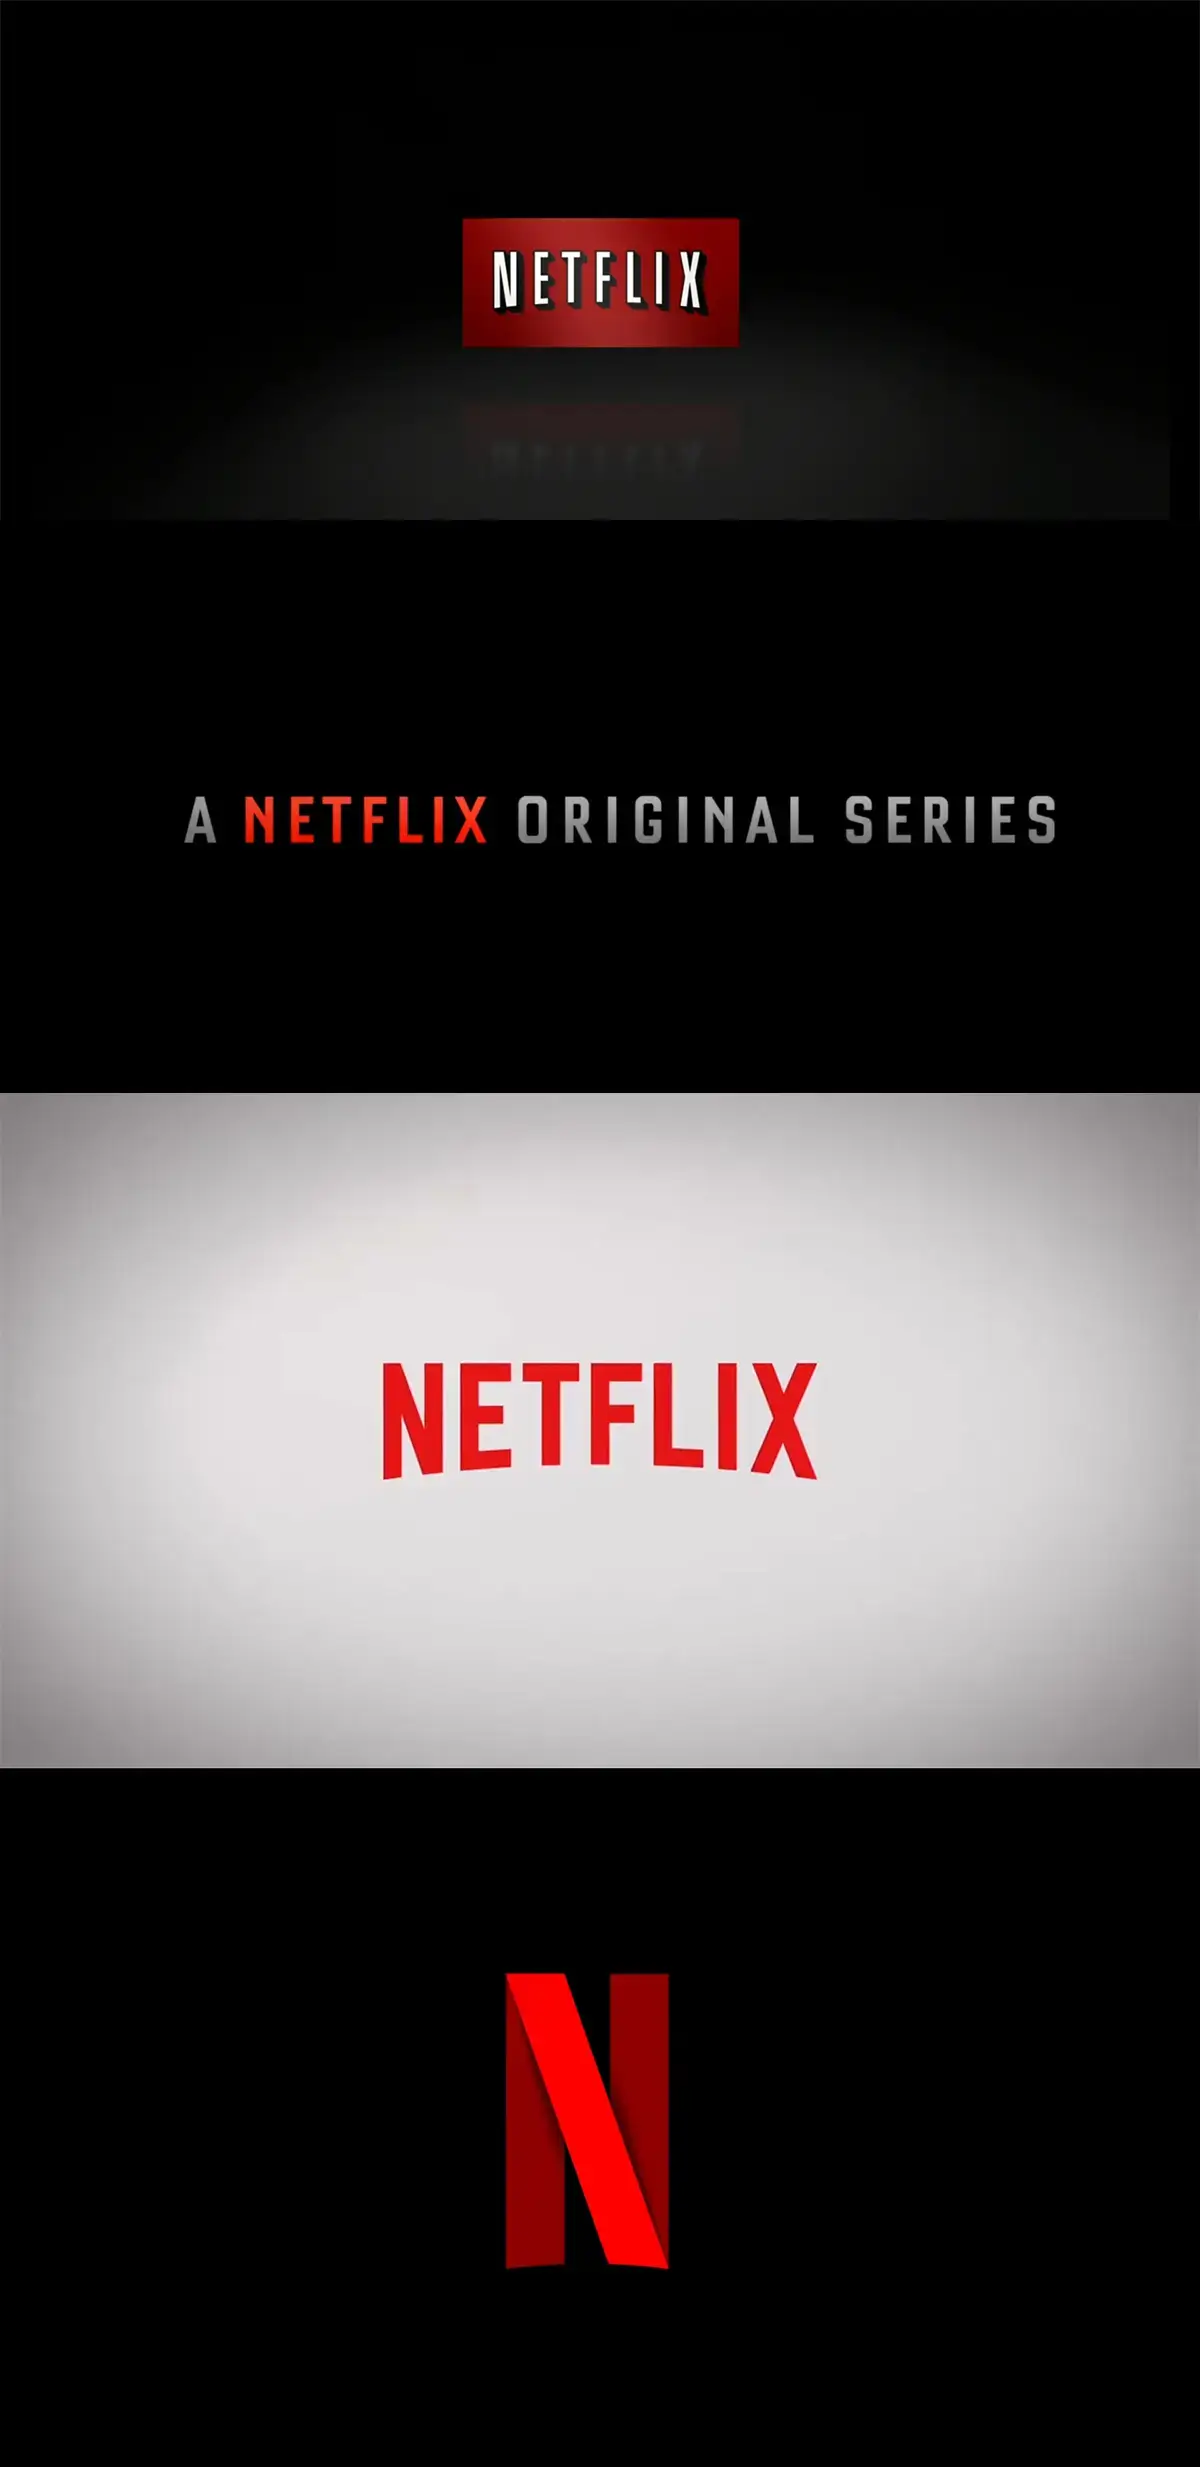 Netflix Original Intros Over The Years